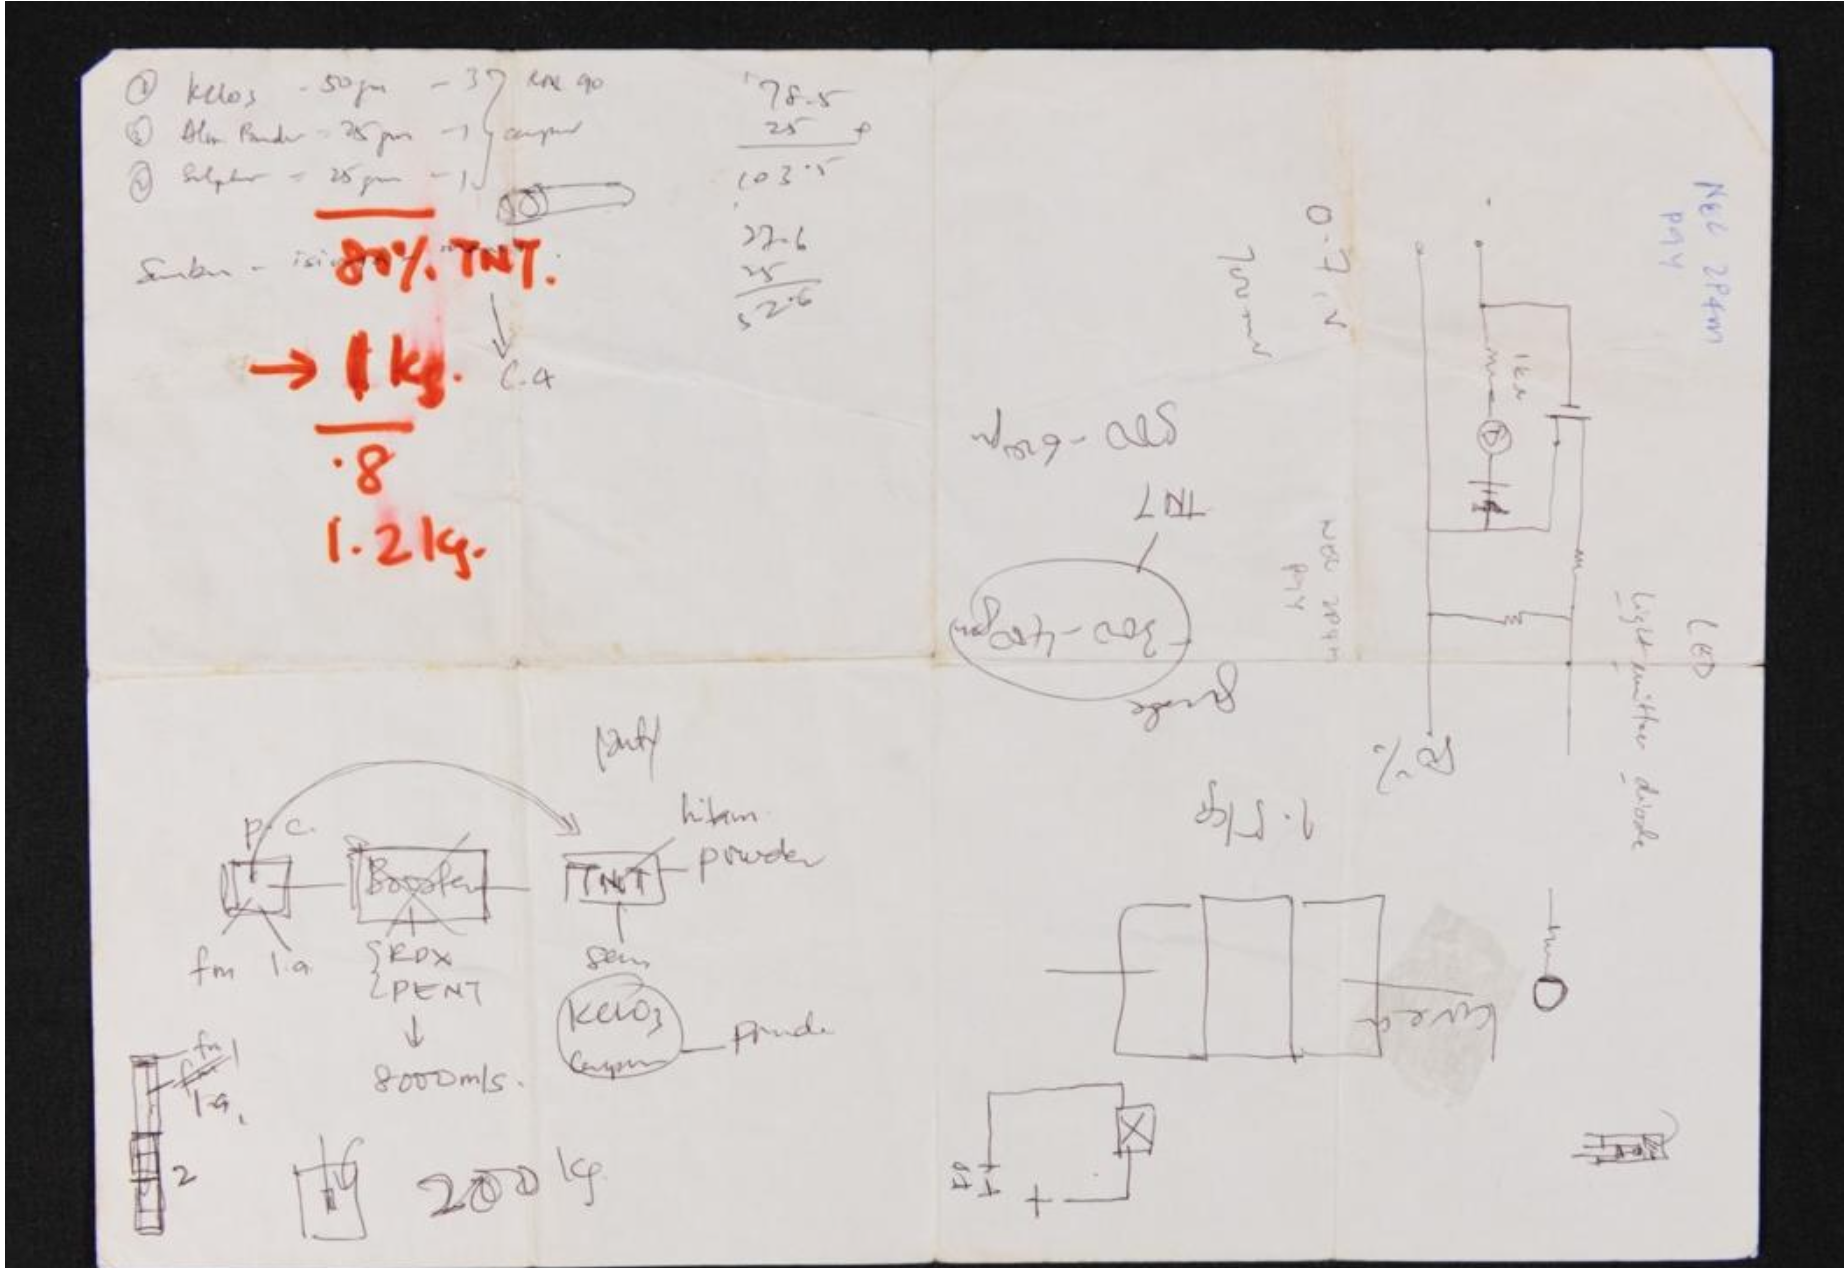 Hand-written notes by a ji member detailing the construction of explosives.